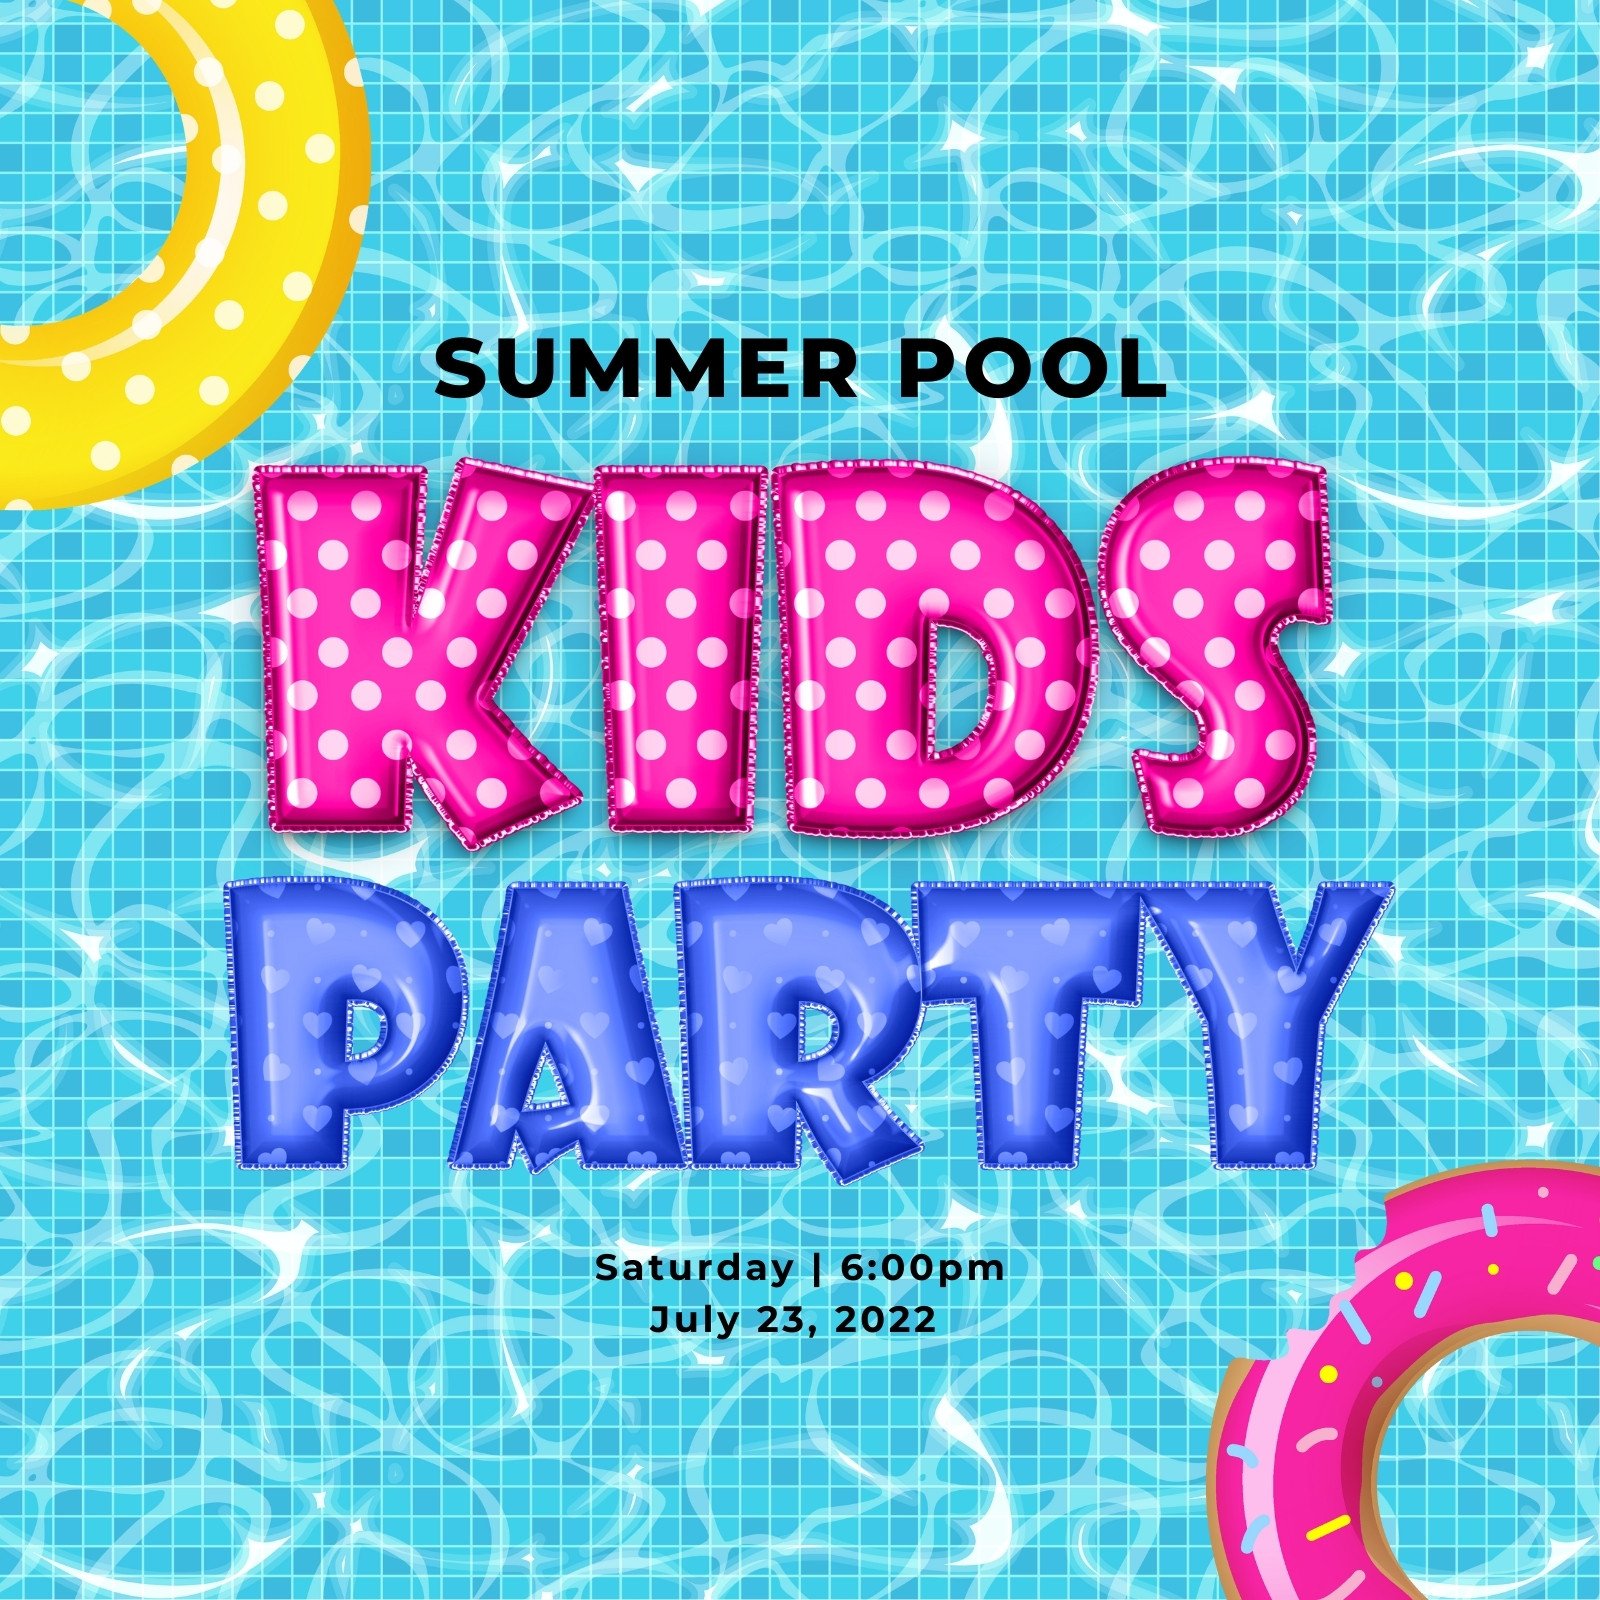 Blue Illustrated Summer Kids Pool Party Instagram Post